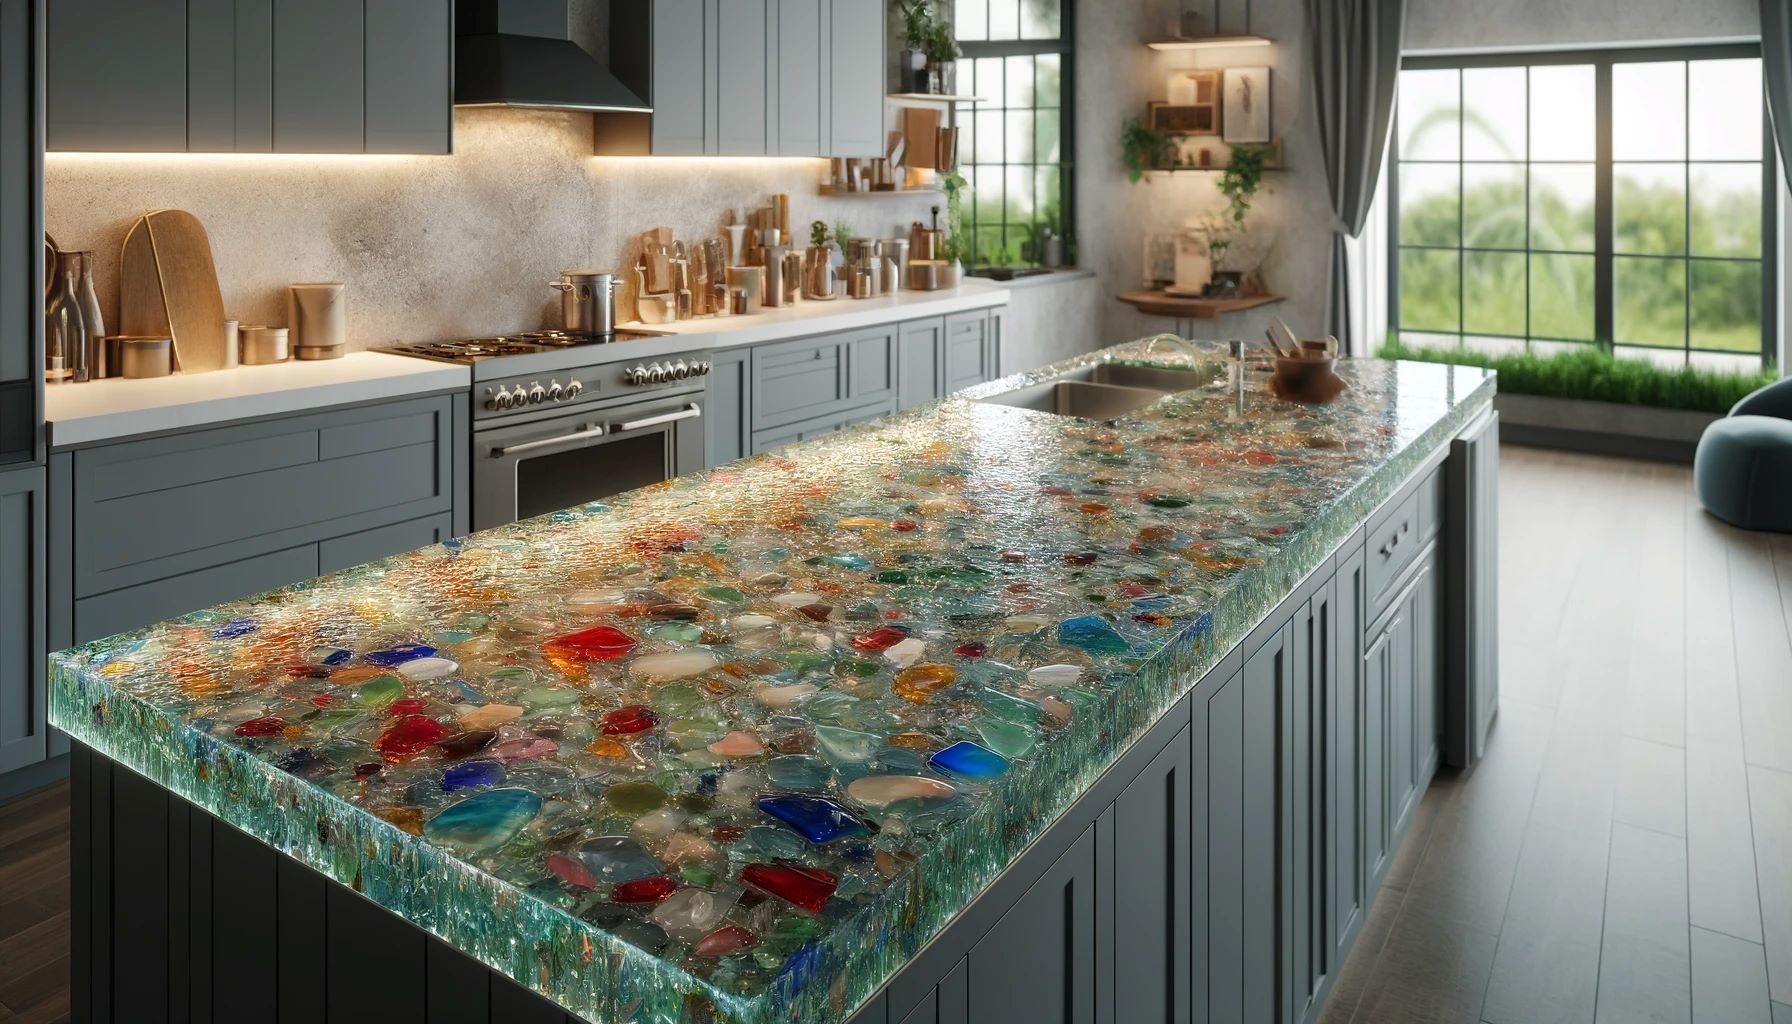 The distinctive design and breathtaking visual impact of glass countertops have made them rather popular.